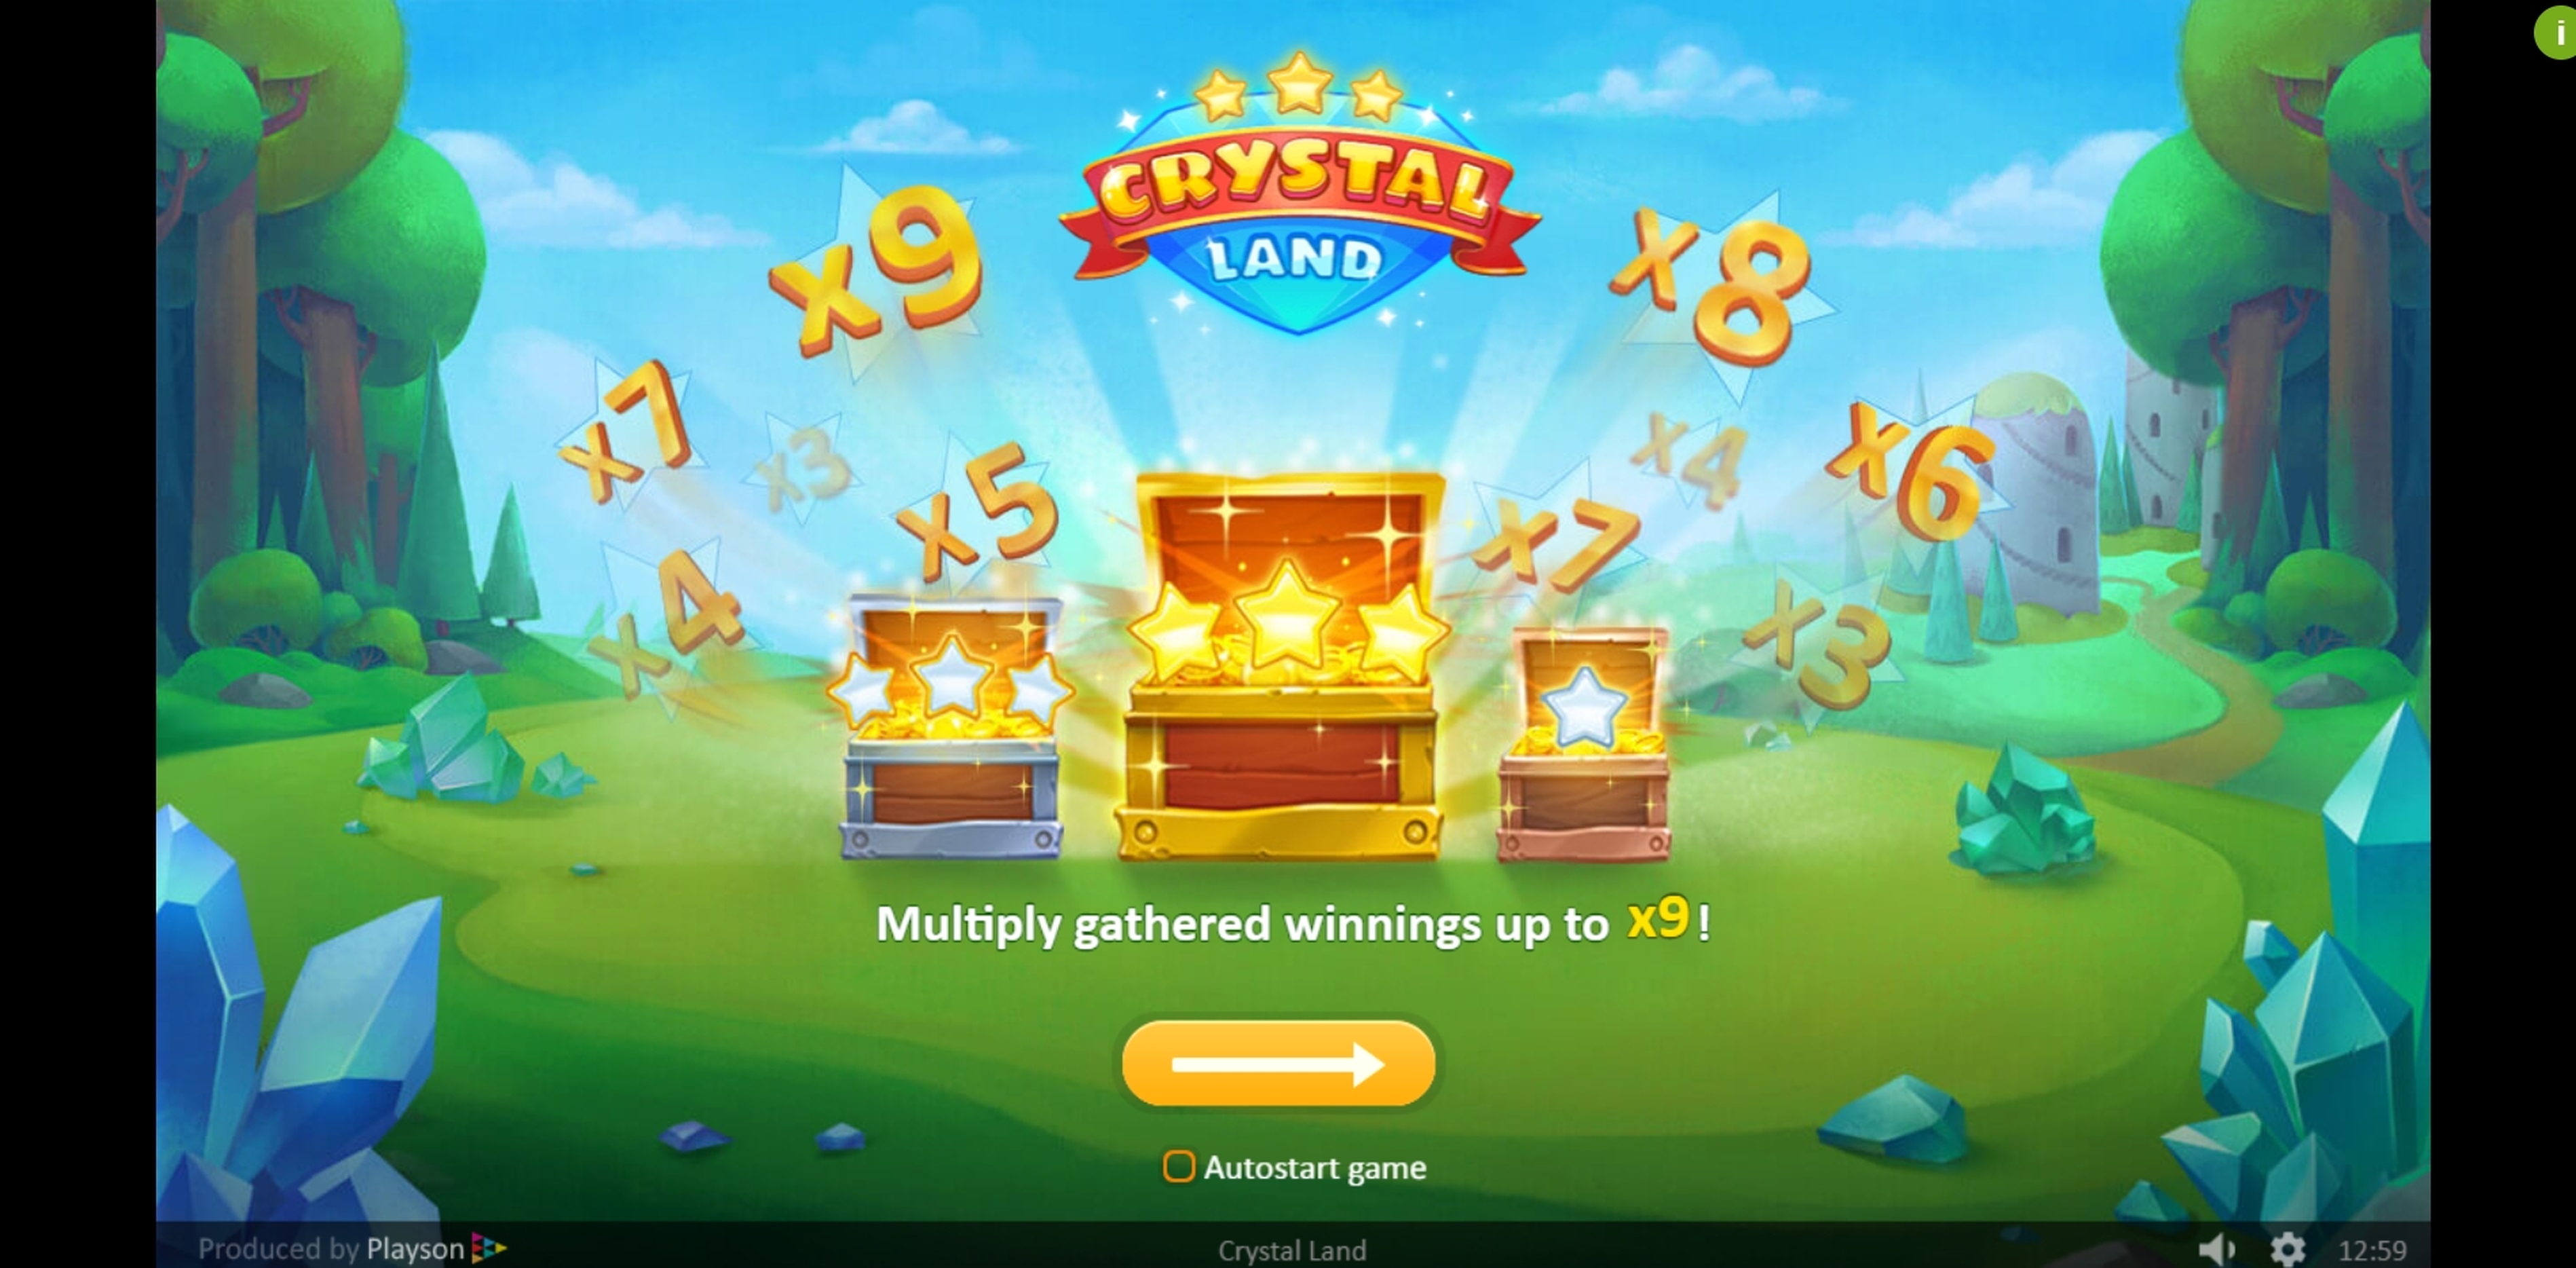 Play Crystal Land Free Casino Slot Game by Playson